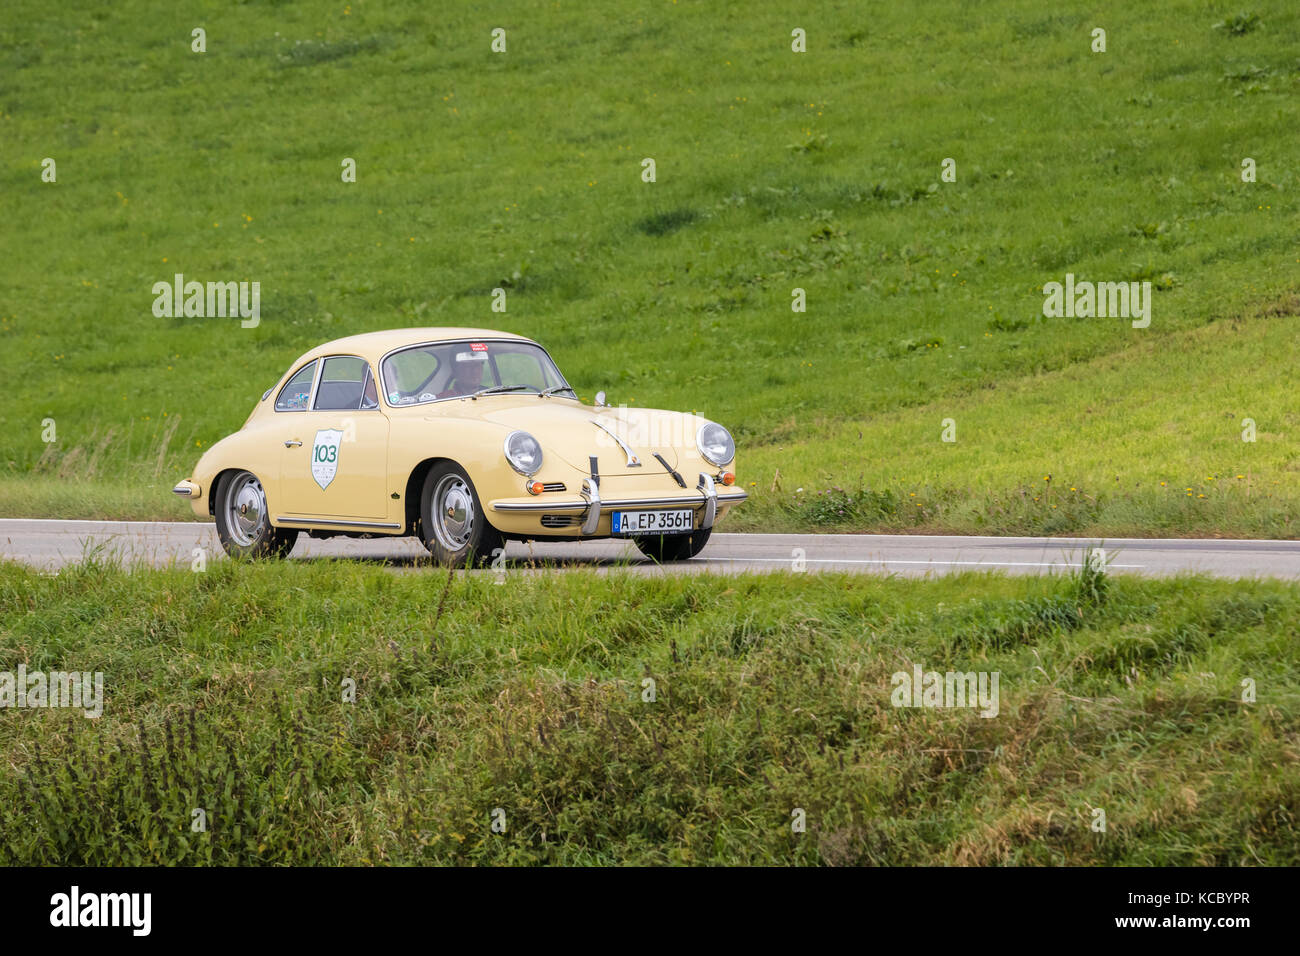 Augsburg, Germany - October 1, 2017: Porsche 356 oldtimer car at the Fuggerstadt Classic 2017 Oldtimer Rallye on October 1, 2017 in Augsburg, Germany. Stock Photo